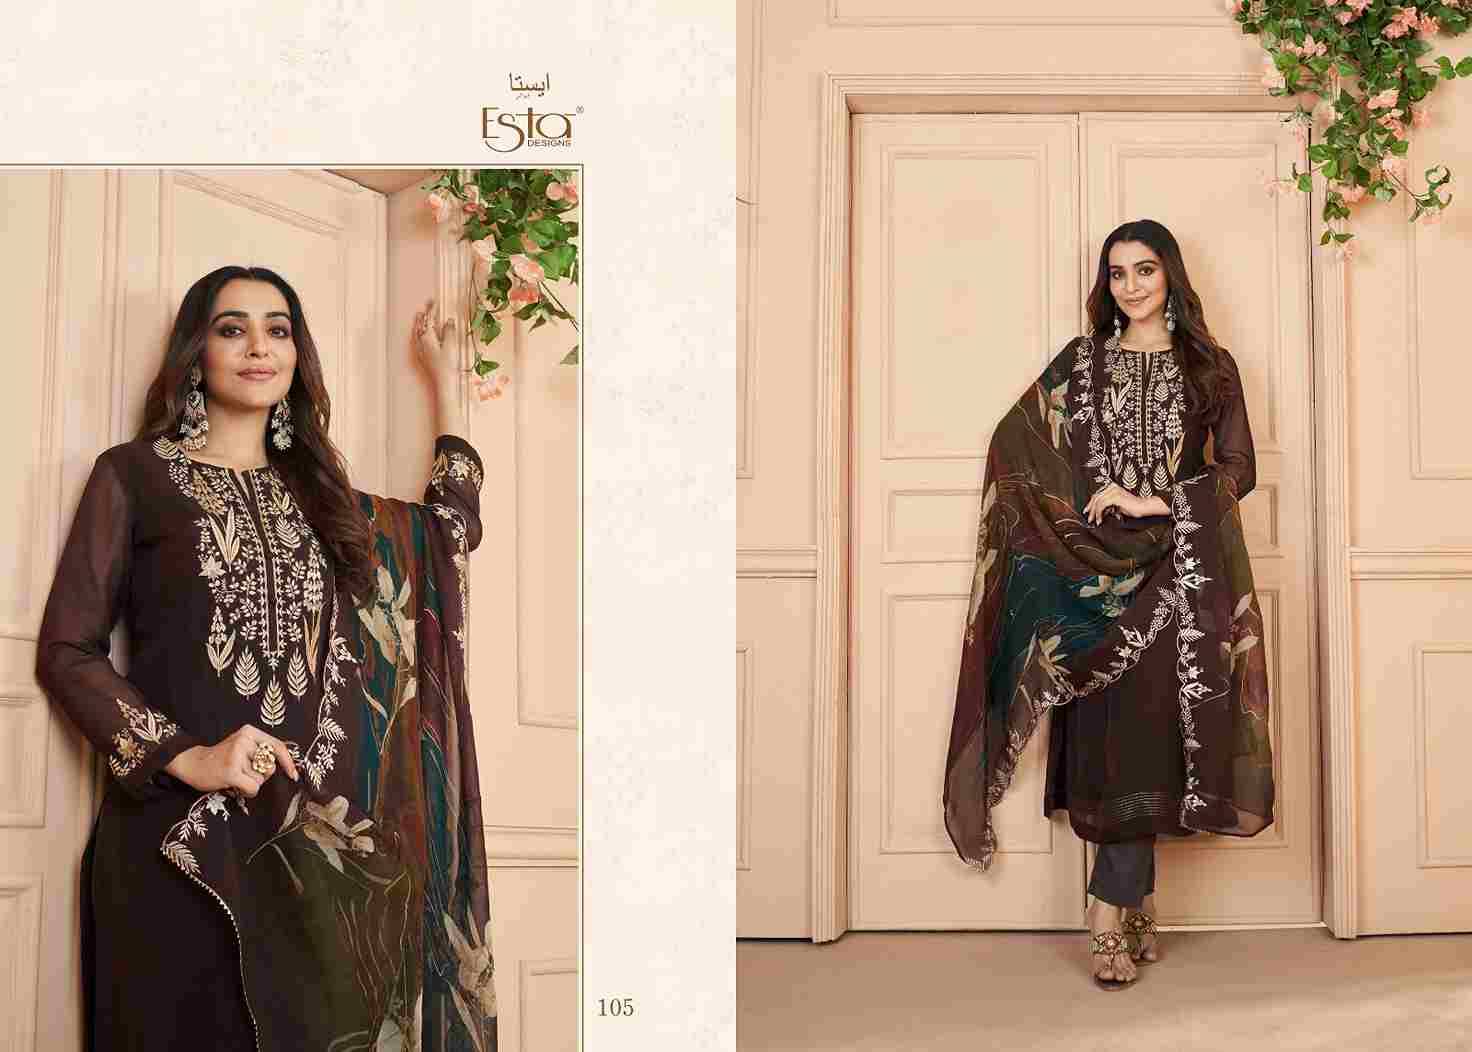 Auram By Esta Designs 101 To 106 Series Beautiful Festive Suits Colorful Stylish Fancy Casual Wear & Ethnic Wear Organza Silk Dresses At Wholesale Price